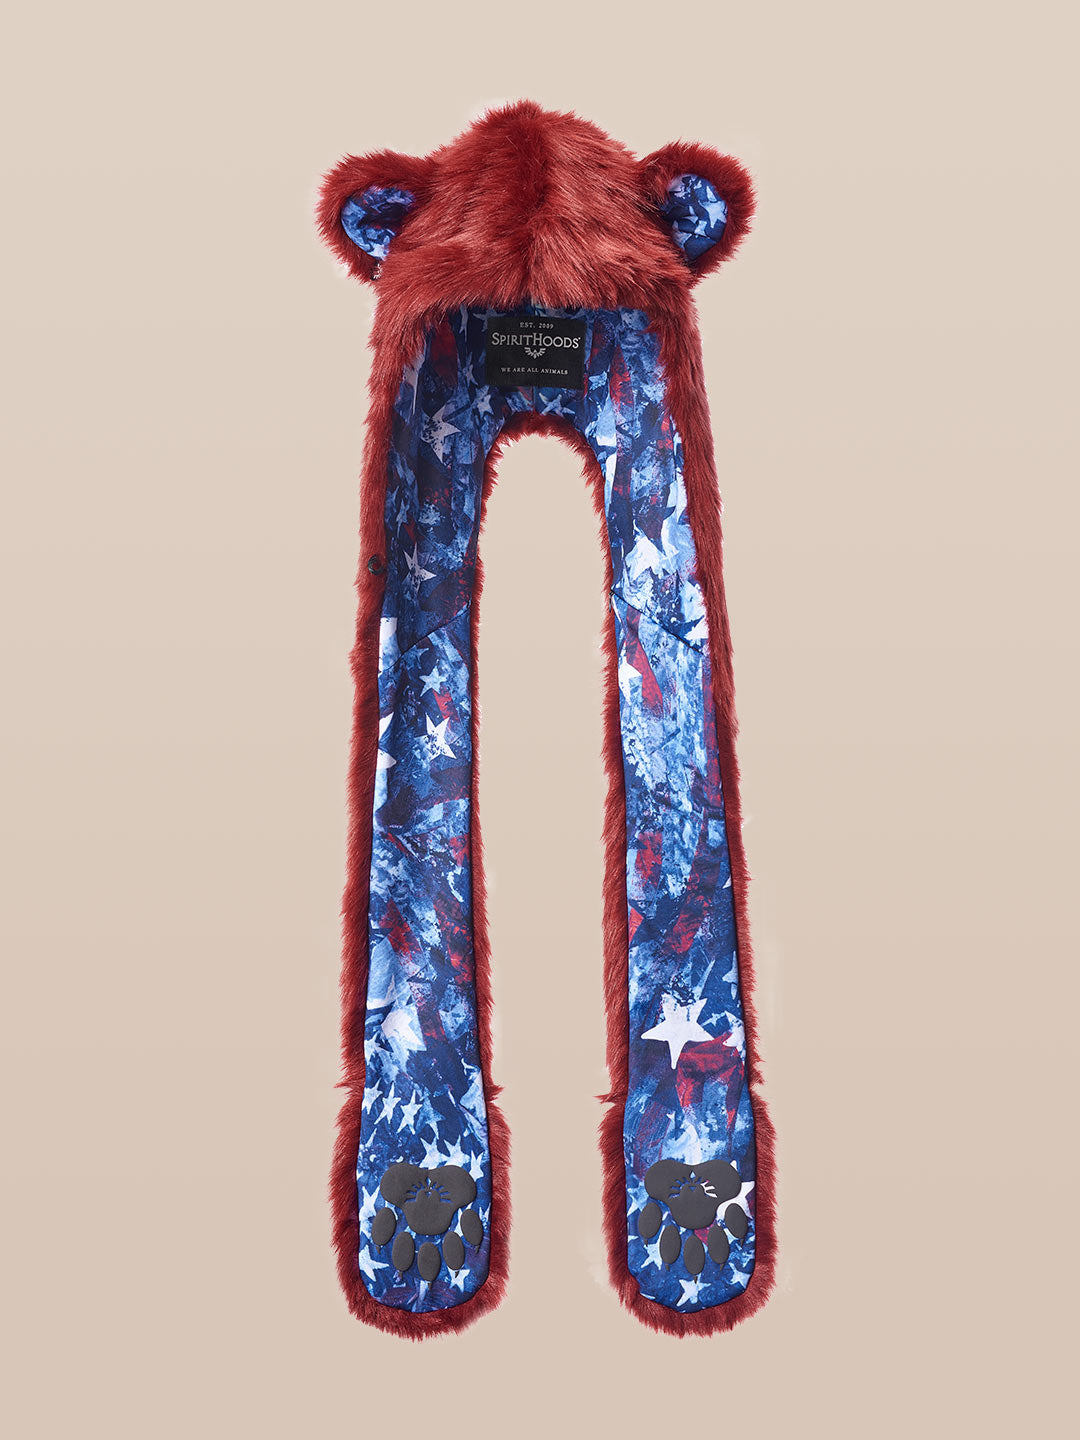 Red, White, and Blue USA Bear Collector Edition SpiritHood